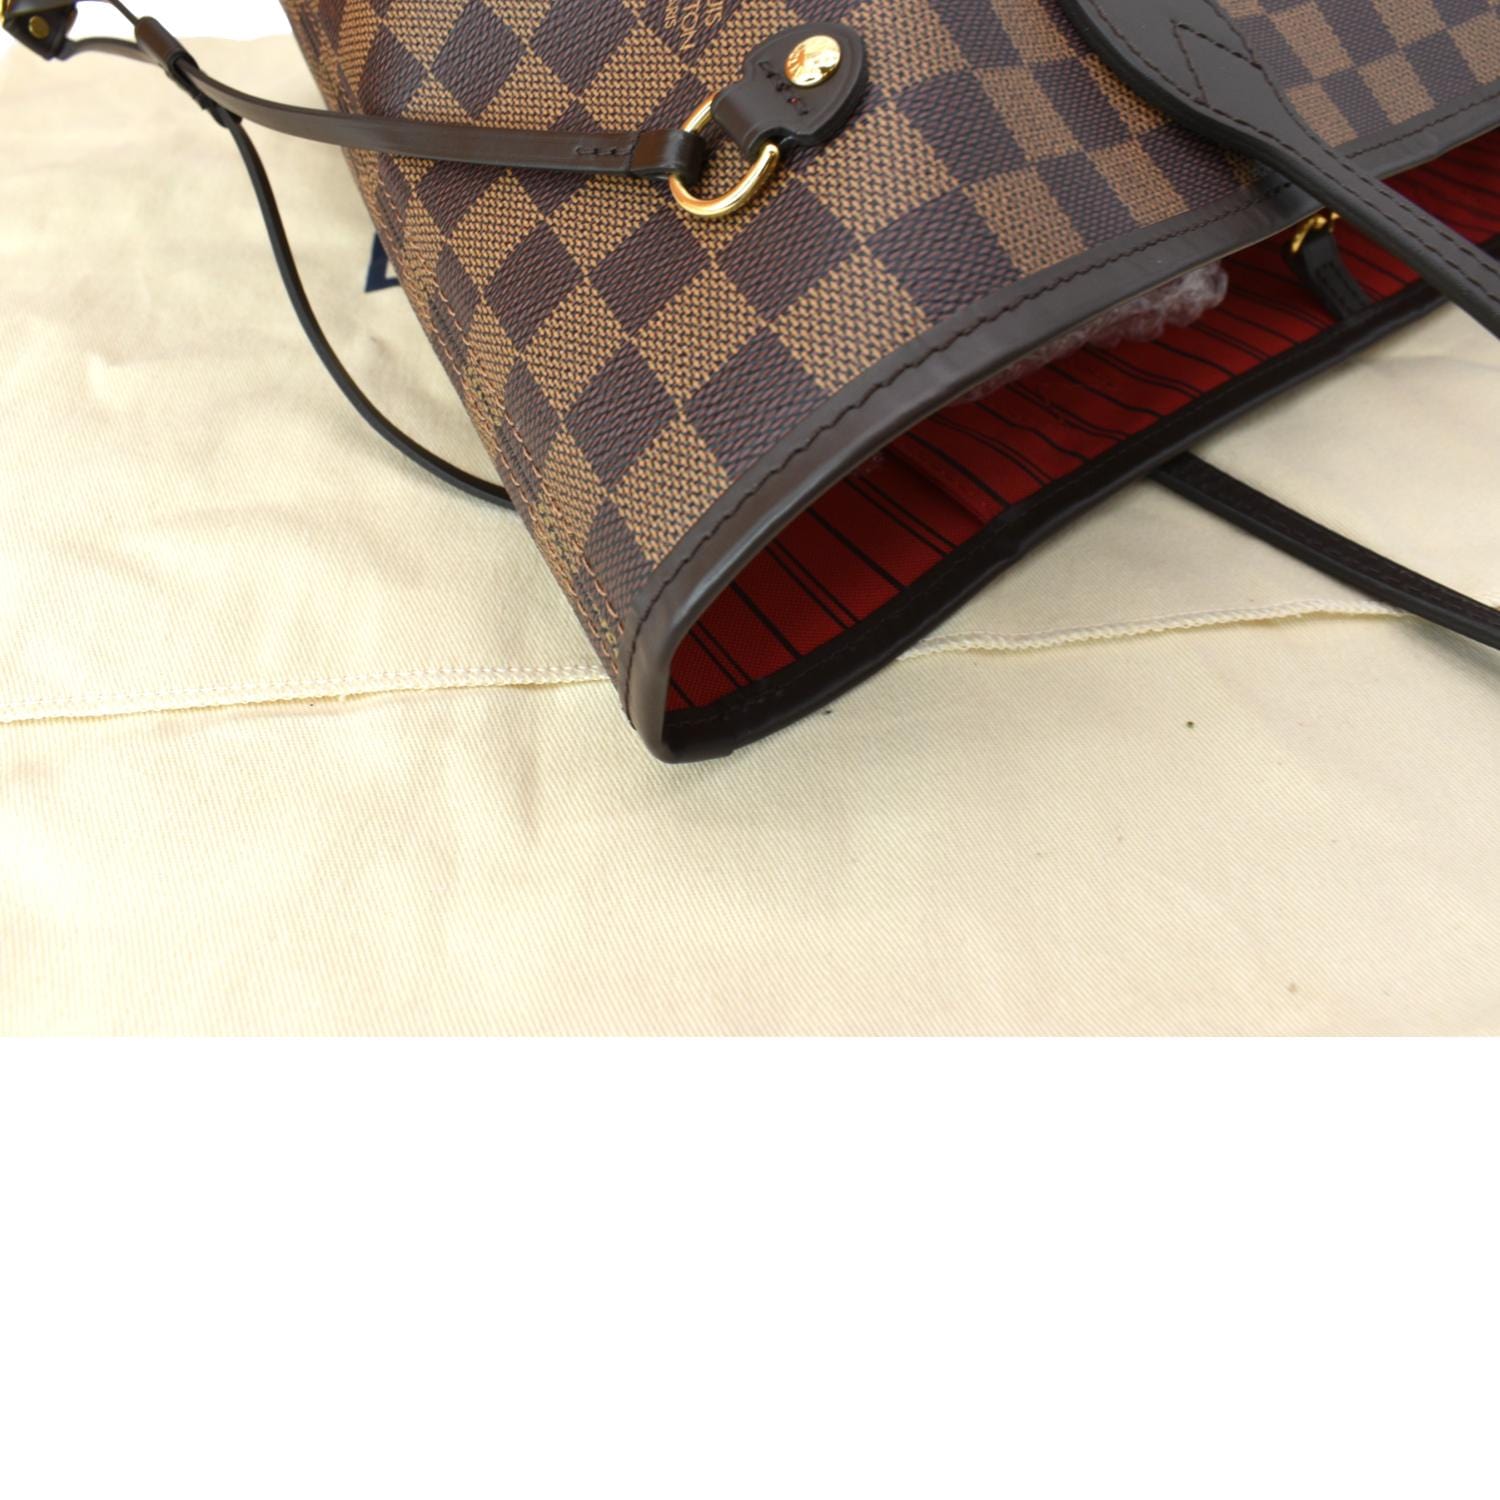 LOUIS VUITTON NEVERFULL MM with POUCH Beige SD0117